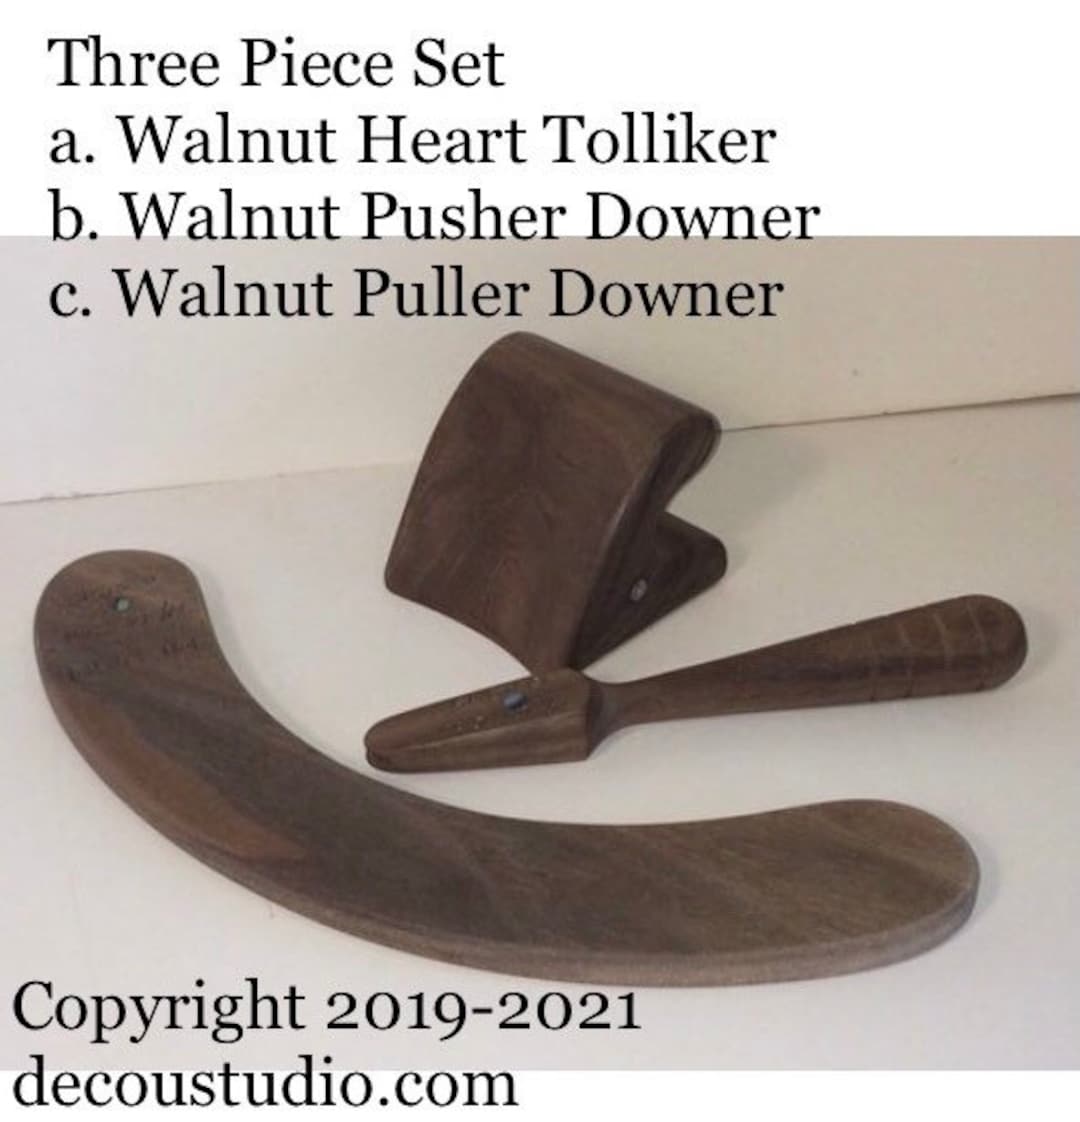 Hat Makers Tool Set, Includes Foot Tolliker, Pusher Downer, Puller